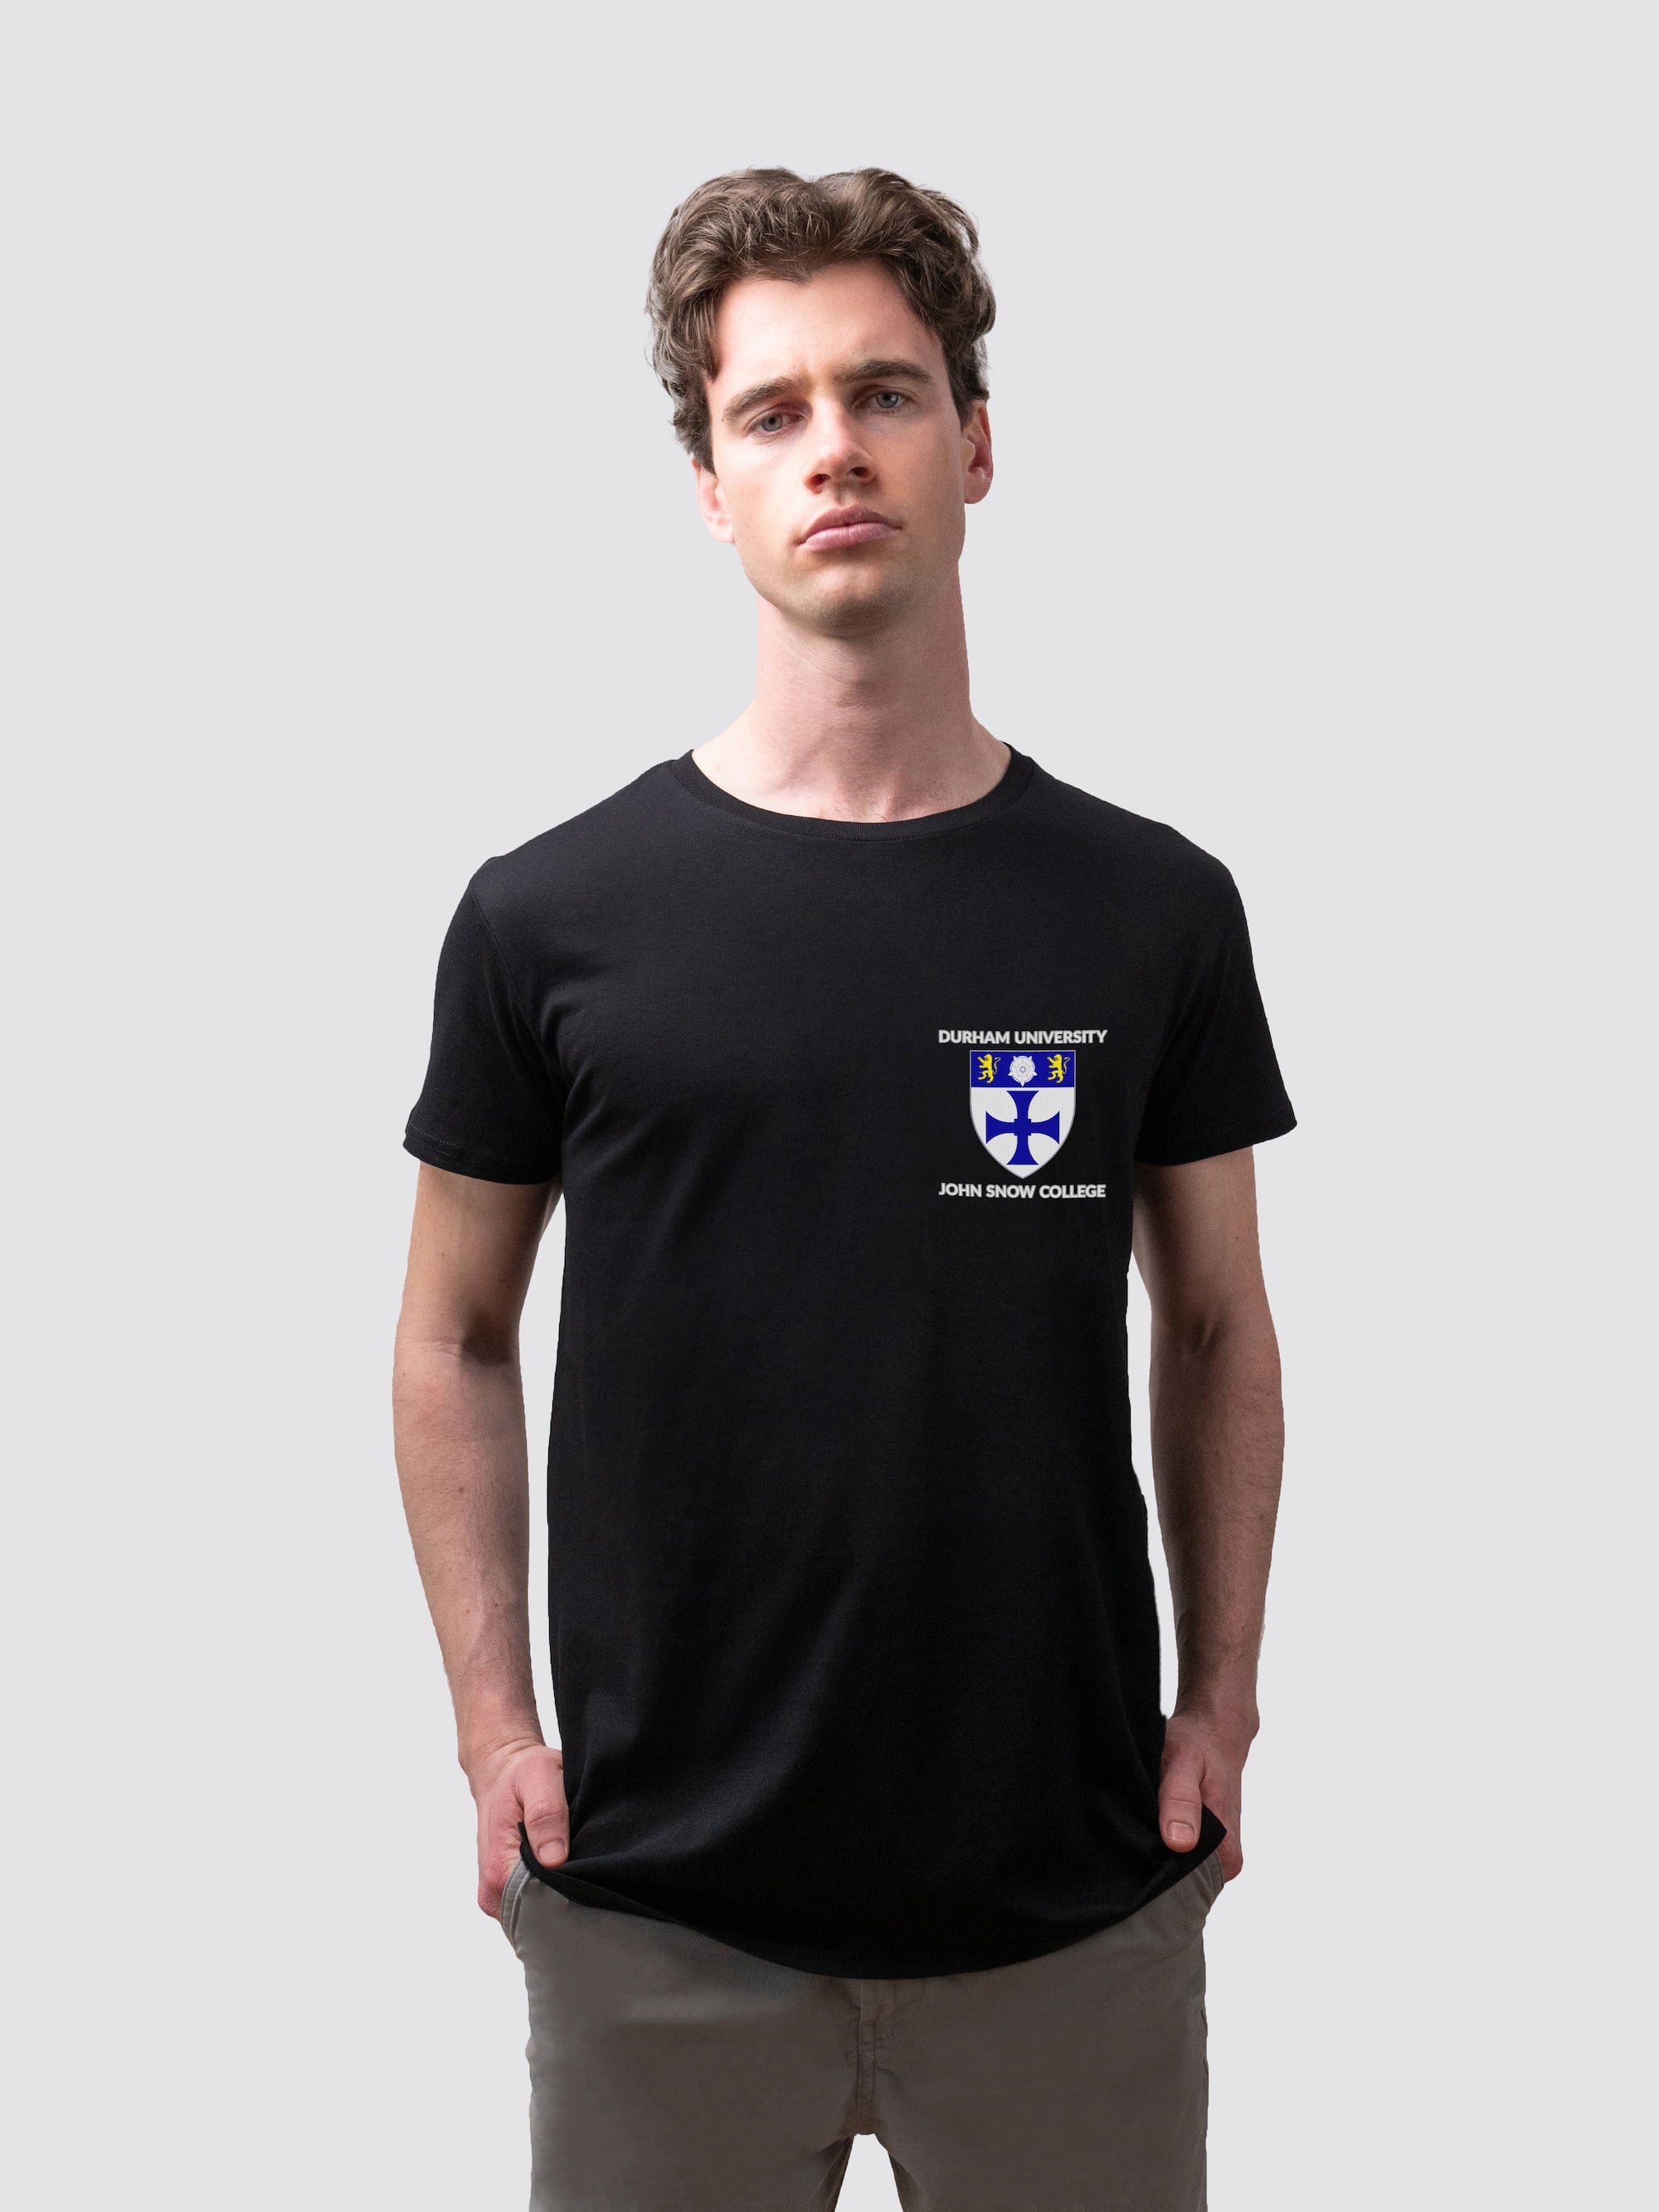 Sustainable John Snow t-shirt, made from organic cotton